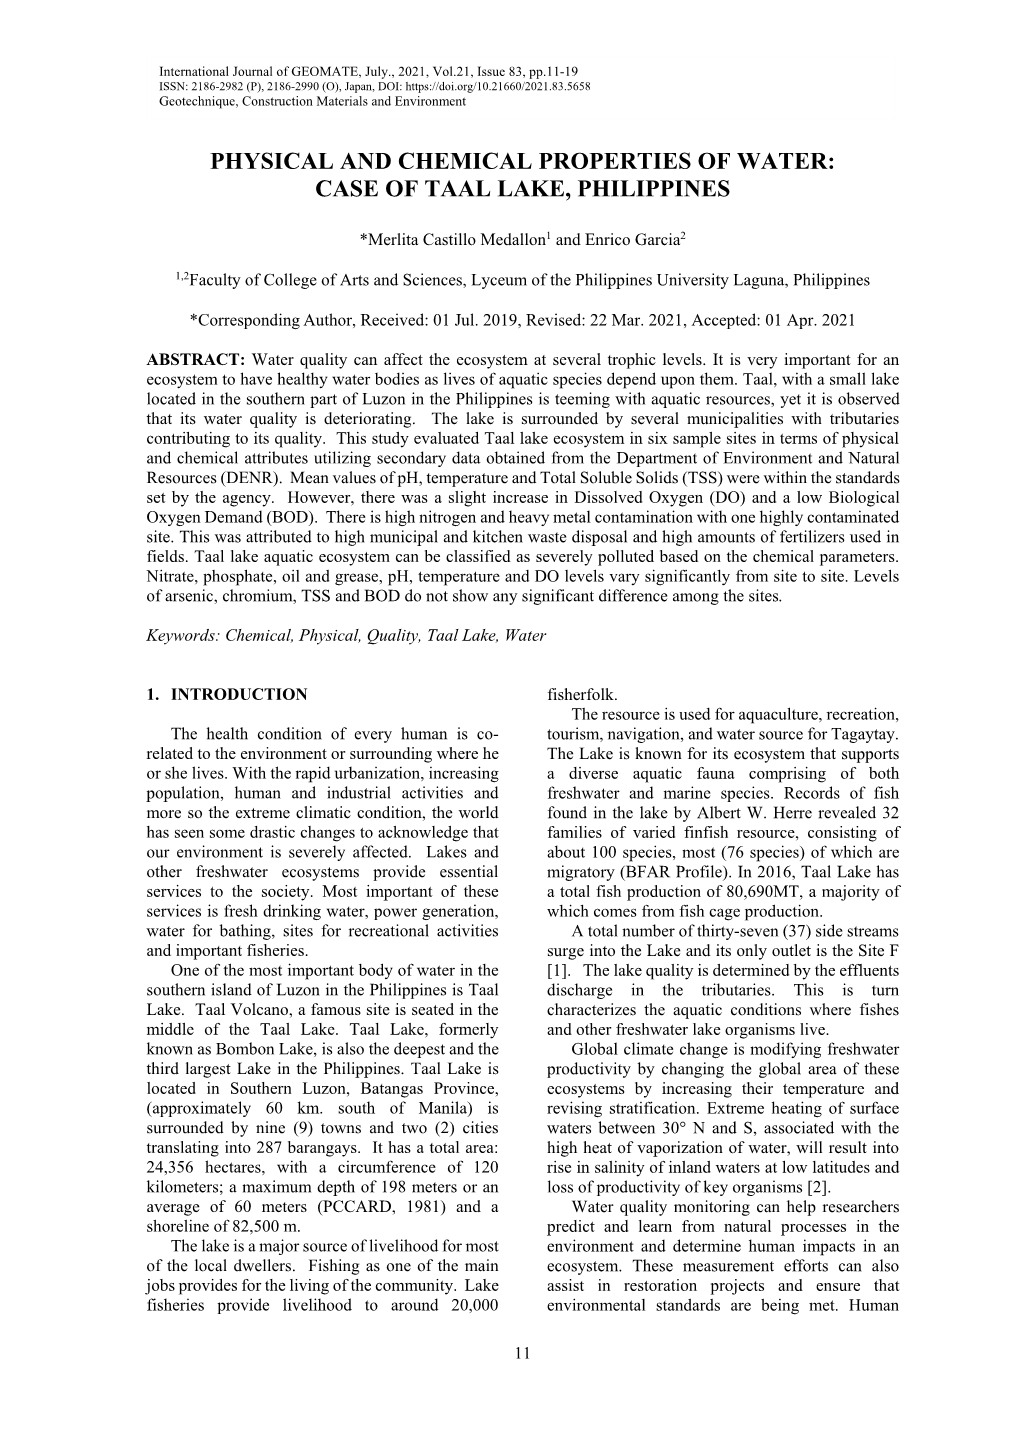 Physical and Chemical Properties of Water: Case of Taal Lake, Philippines